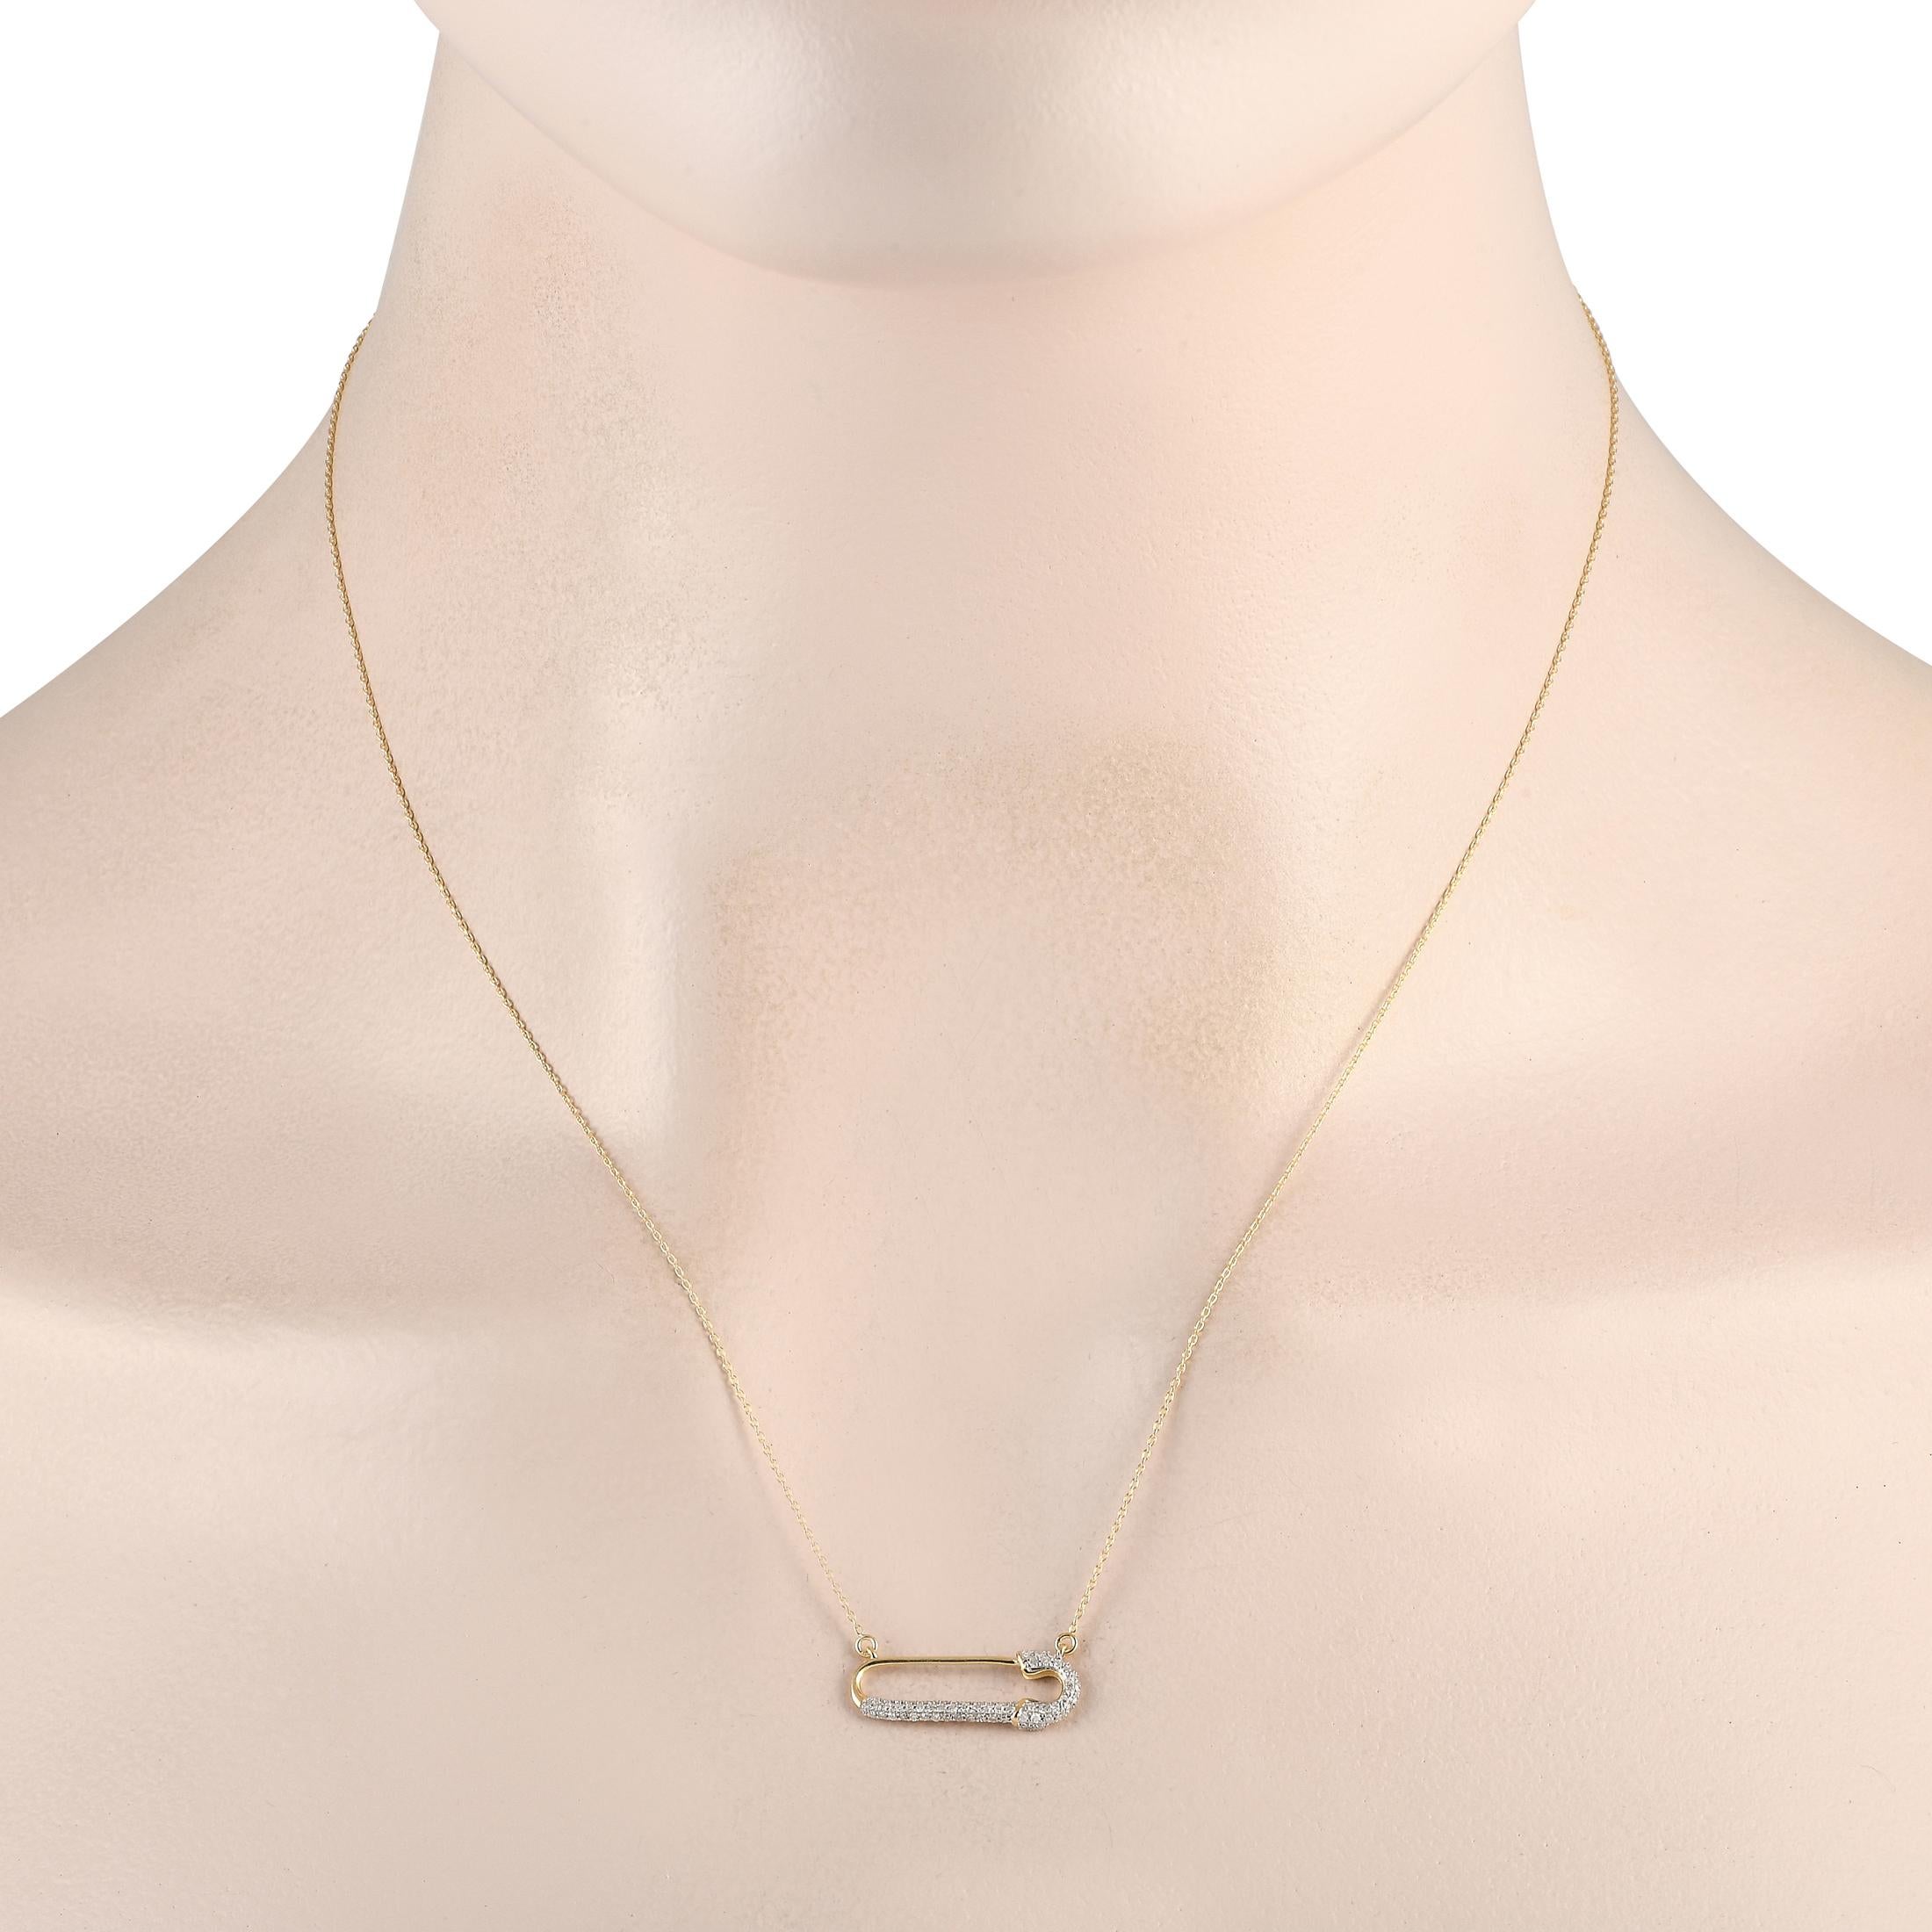 A sleek safety pin shaped pendant makes a statement at the center of an 18 chain on this exquisite necklace. Crafted from 14K Yellow Gold, this dynamic design comes to life thanks to sparkling inset Diamonds totaling 0.17 carats. The pendant